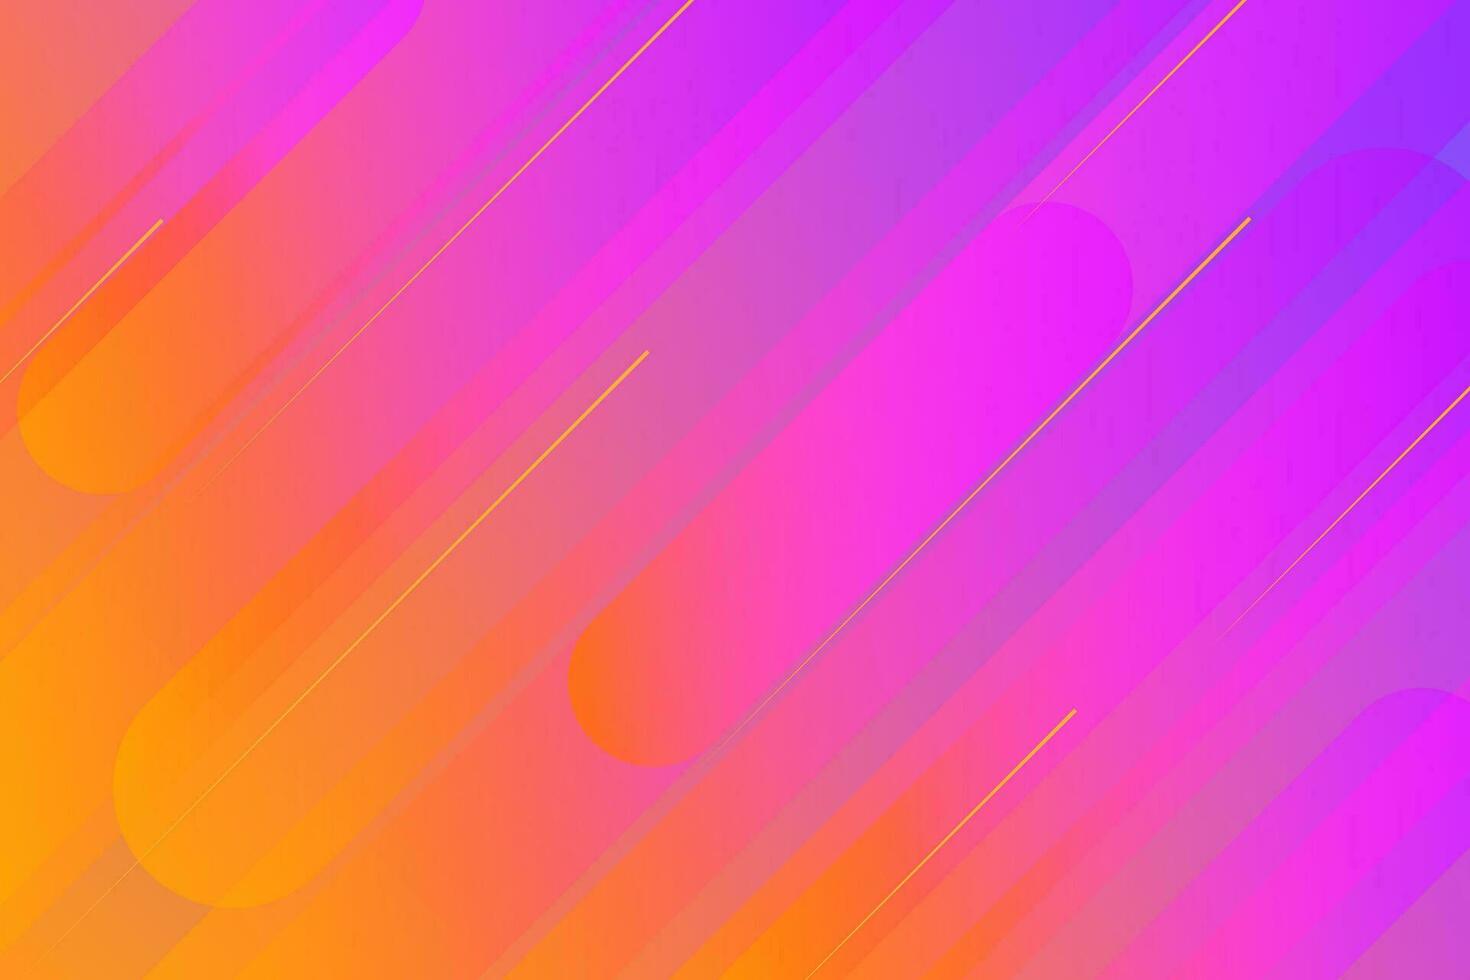 Colorful geometric background with diagonal lines vector